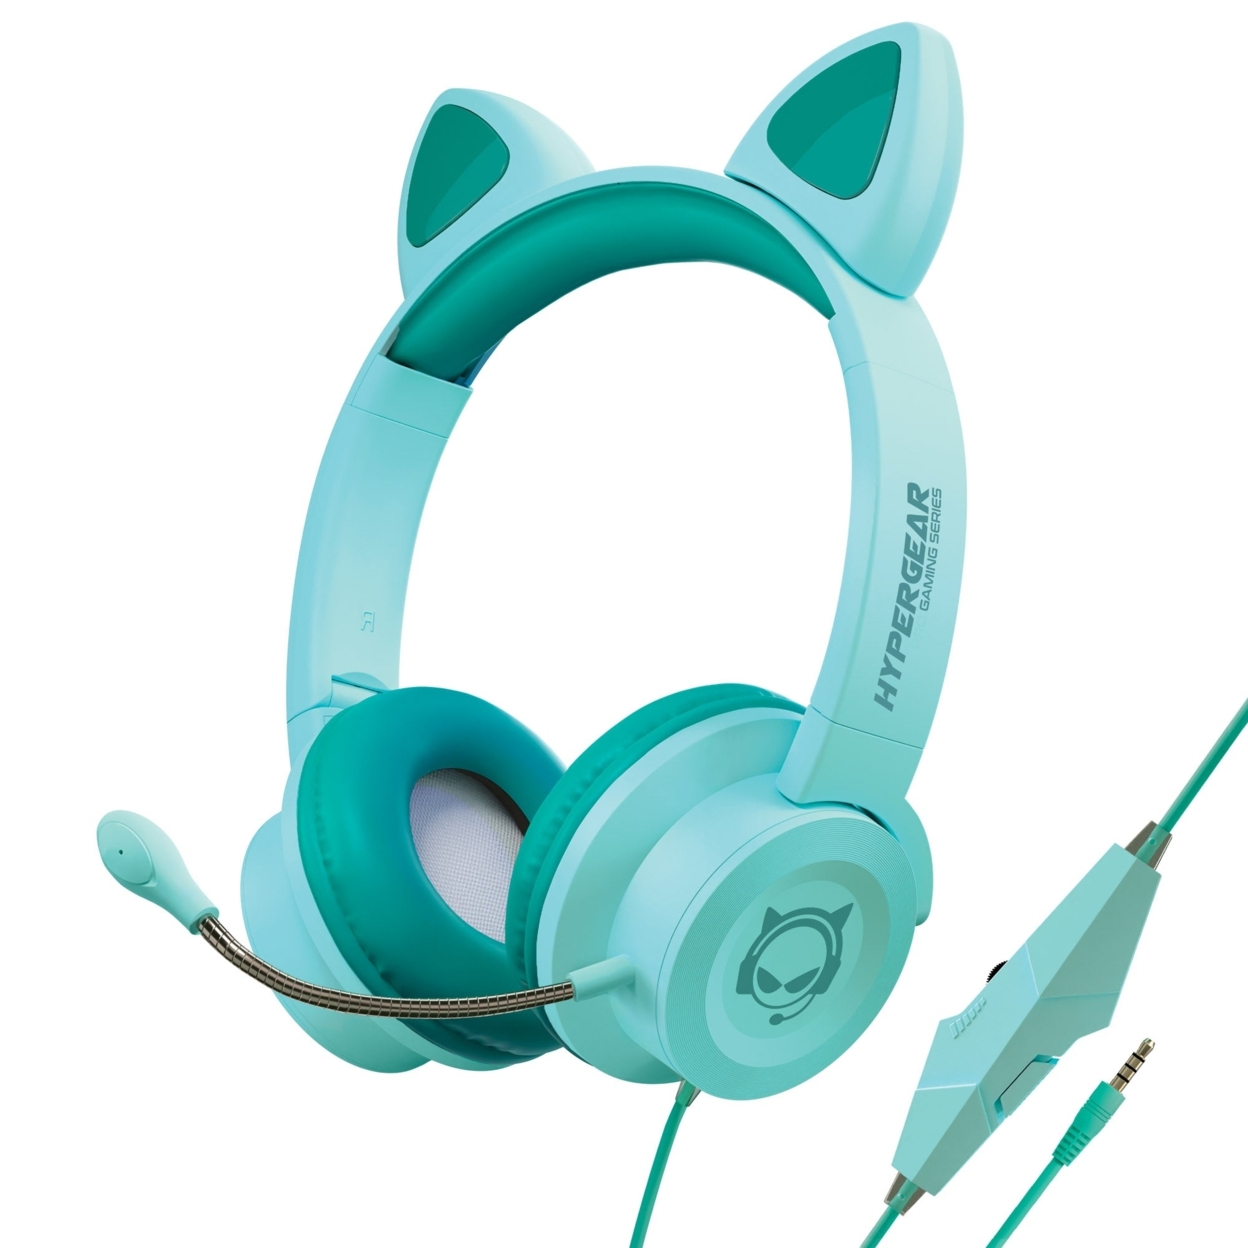 HyperGear Kombat Kitty Gaming Headset With Detachable Mic - Teal